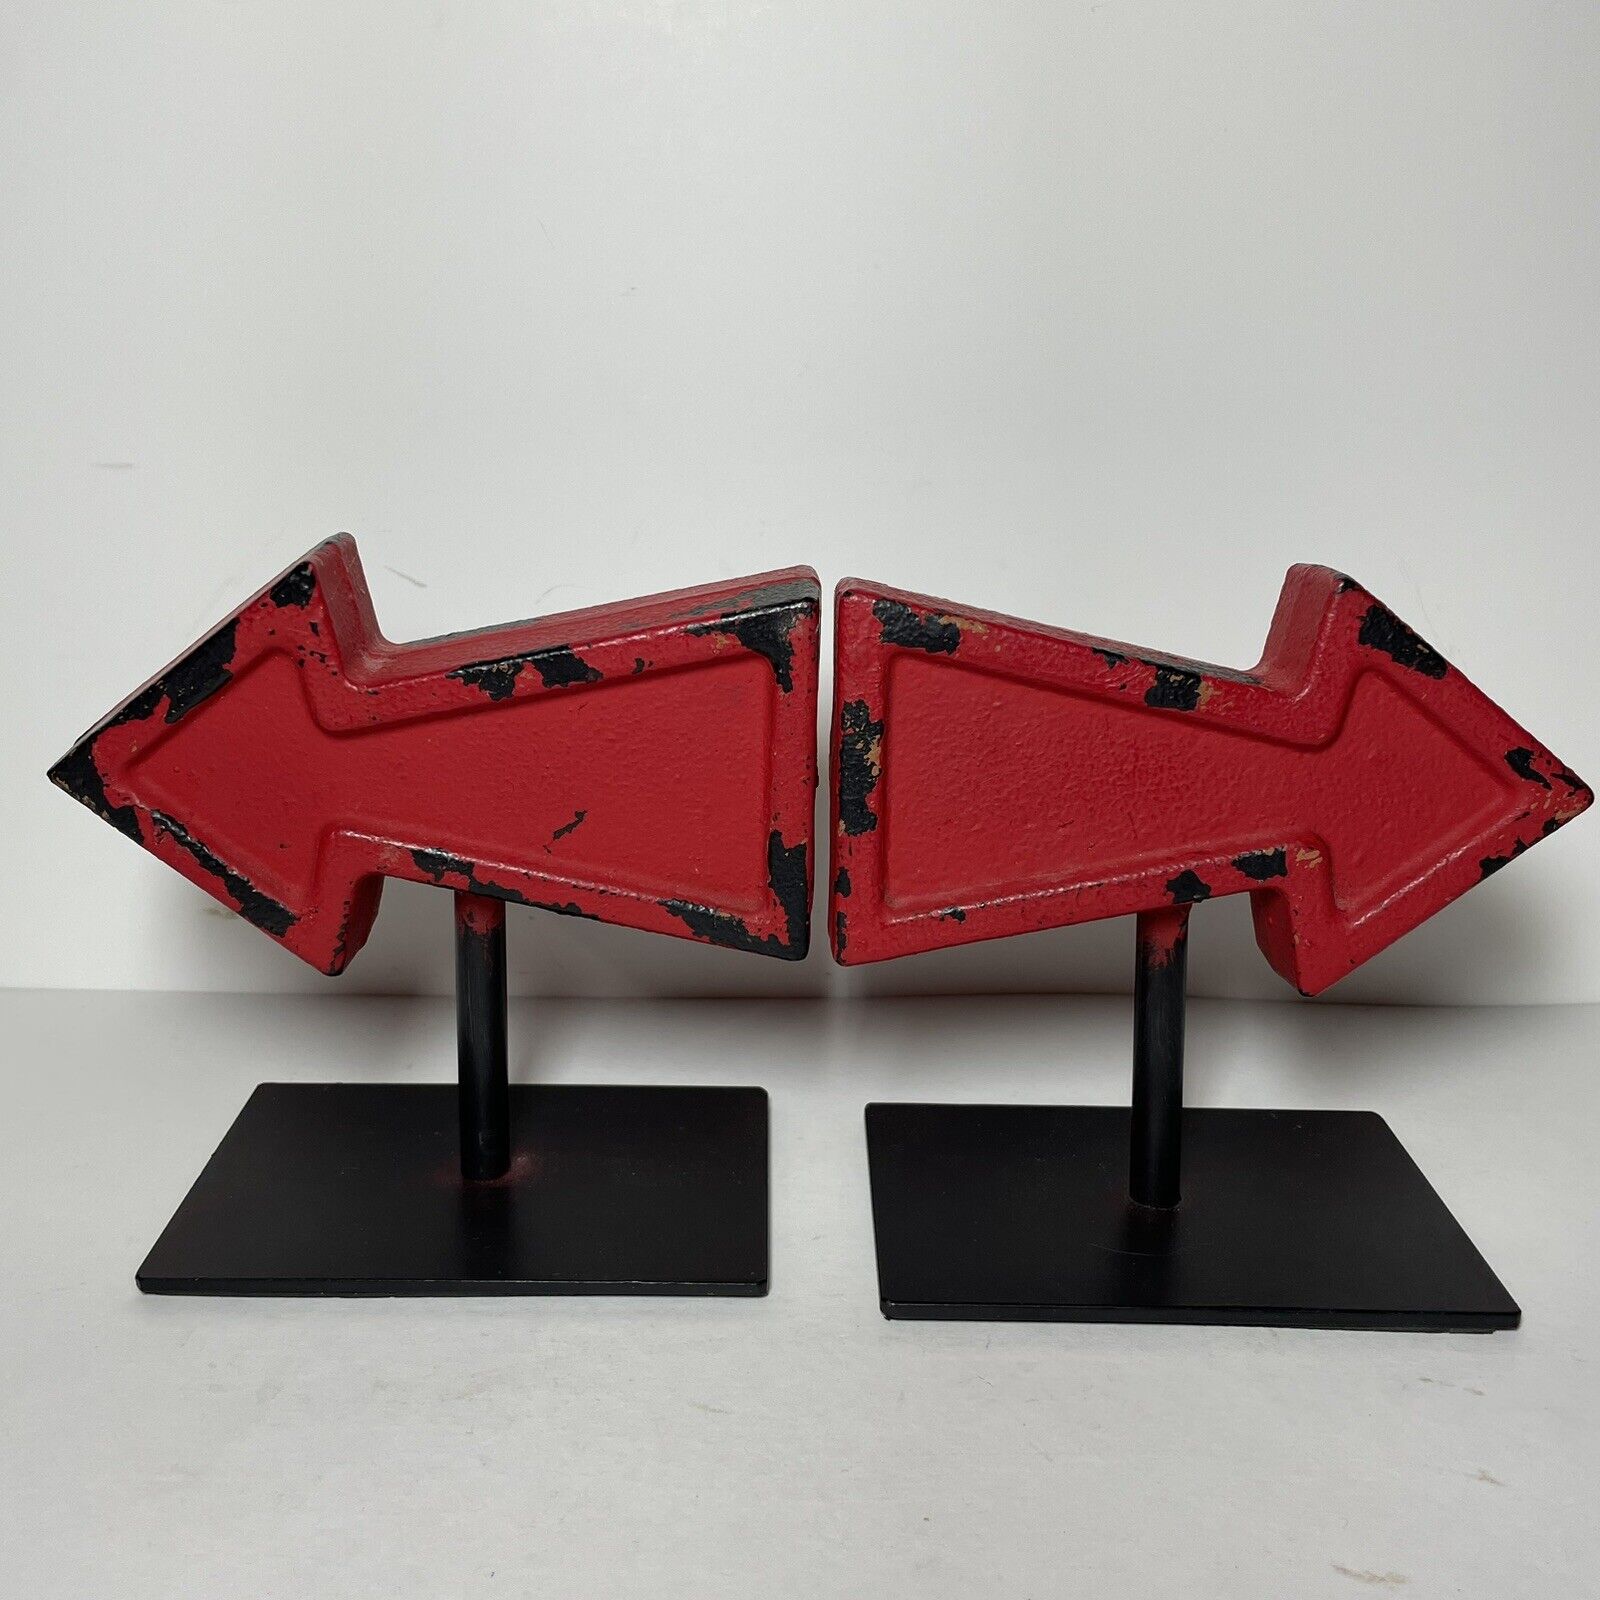 Left & Right Arrows Cast Iron Metal Bookends Red/Black 5.5” x 5.25”